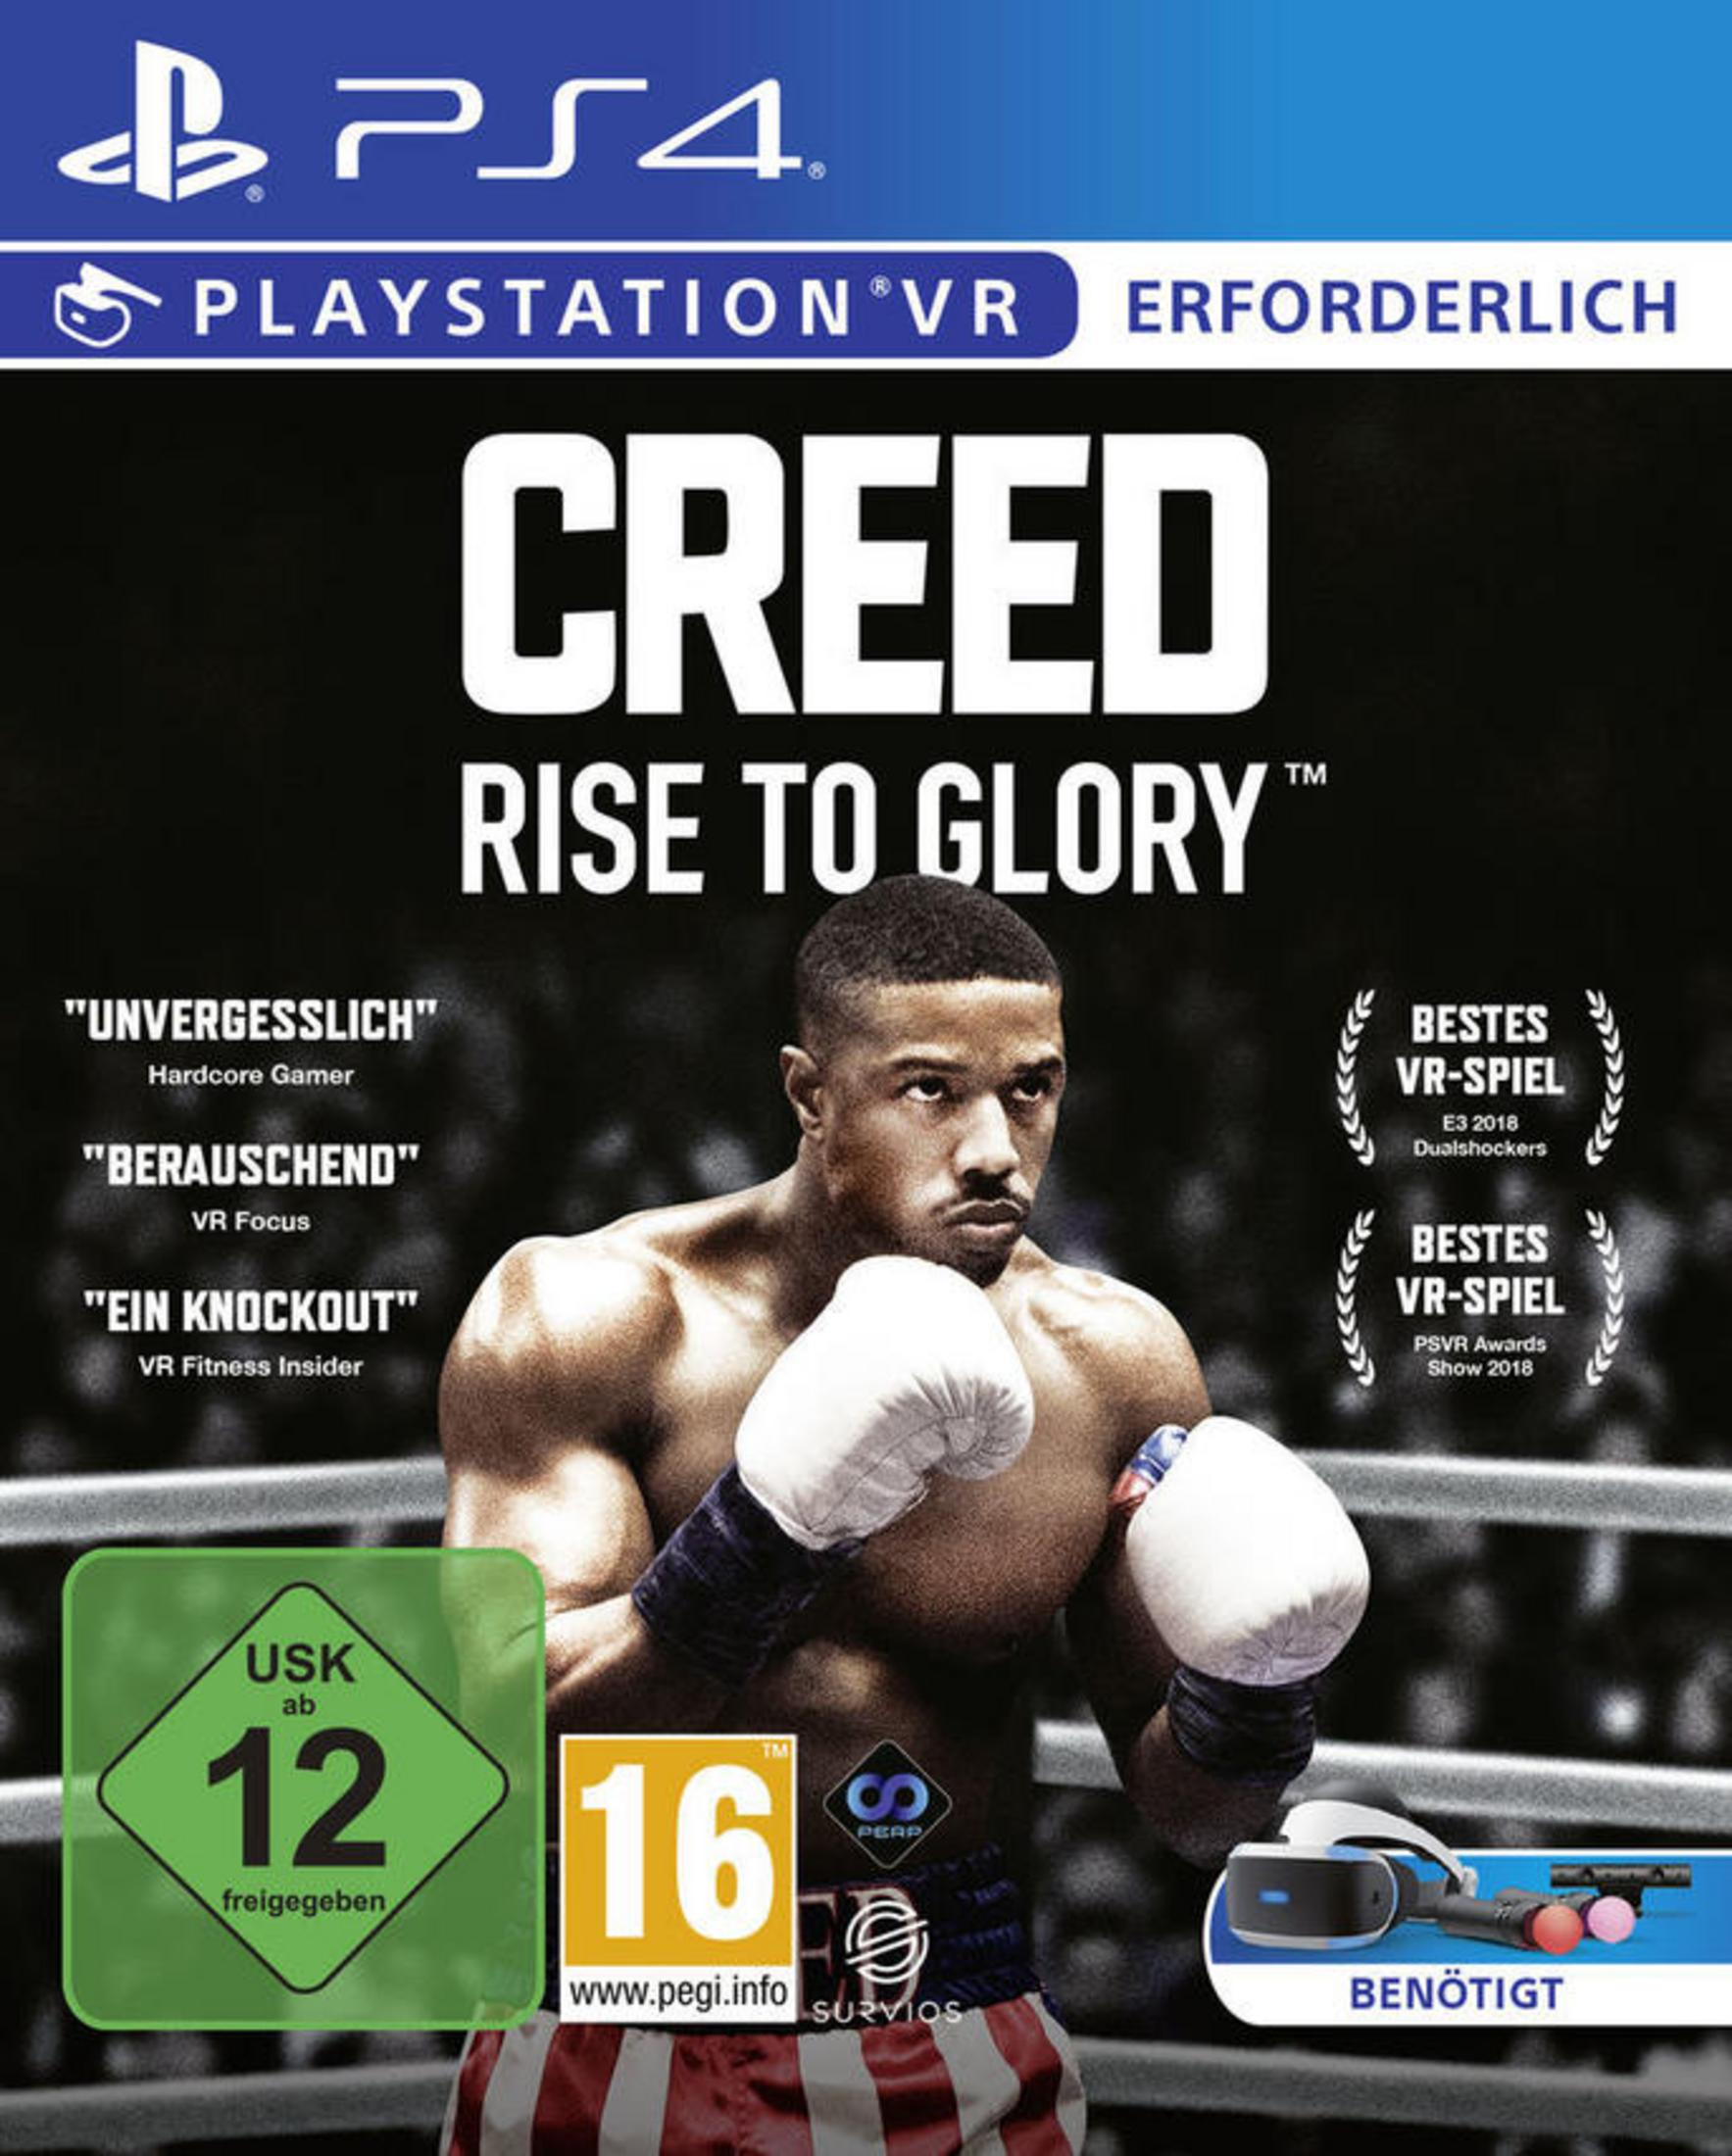 - [PlayStation to PS-4 4] Rise Glory VR Creed: